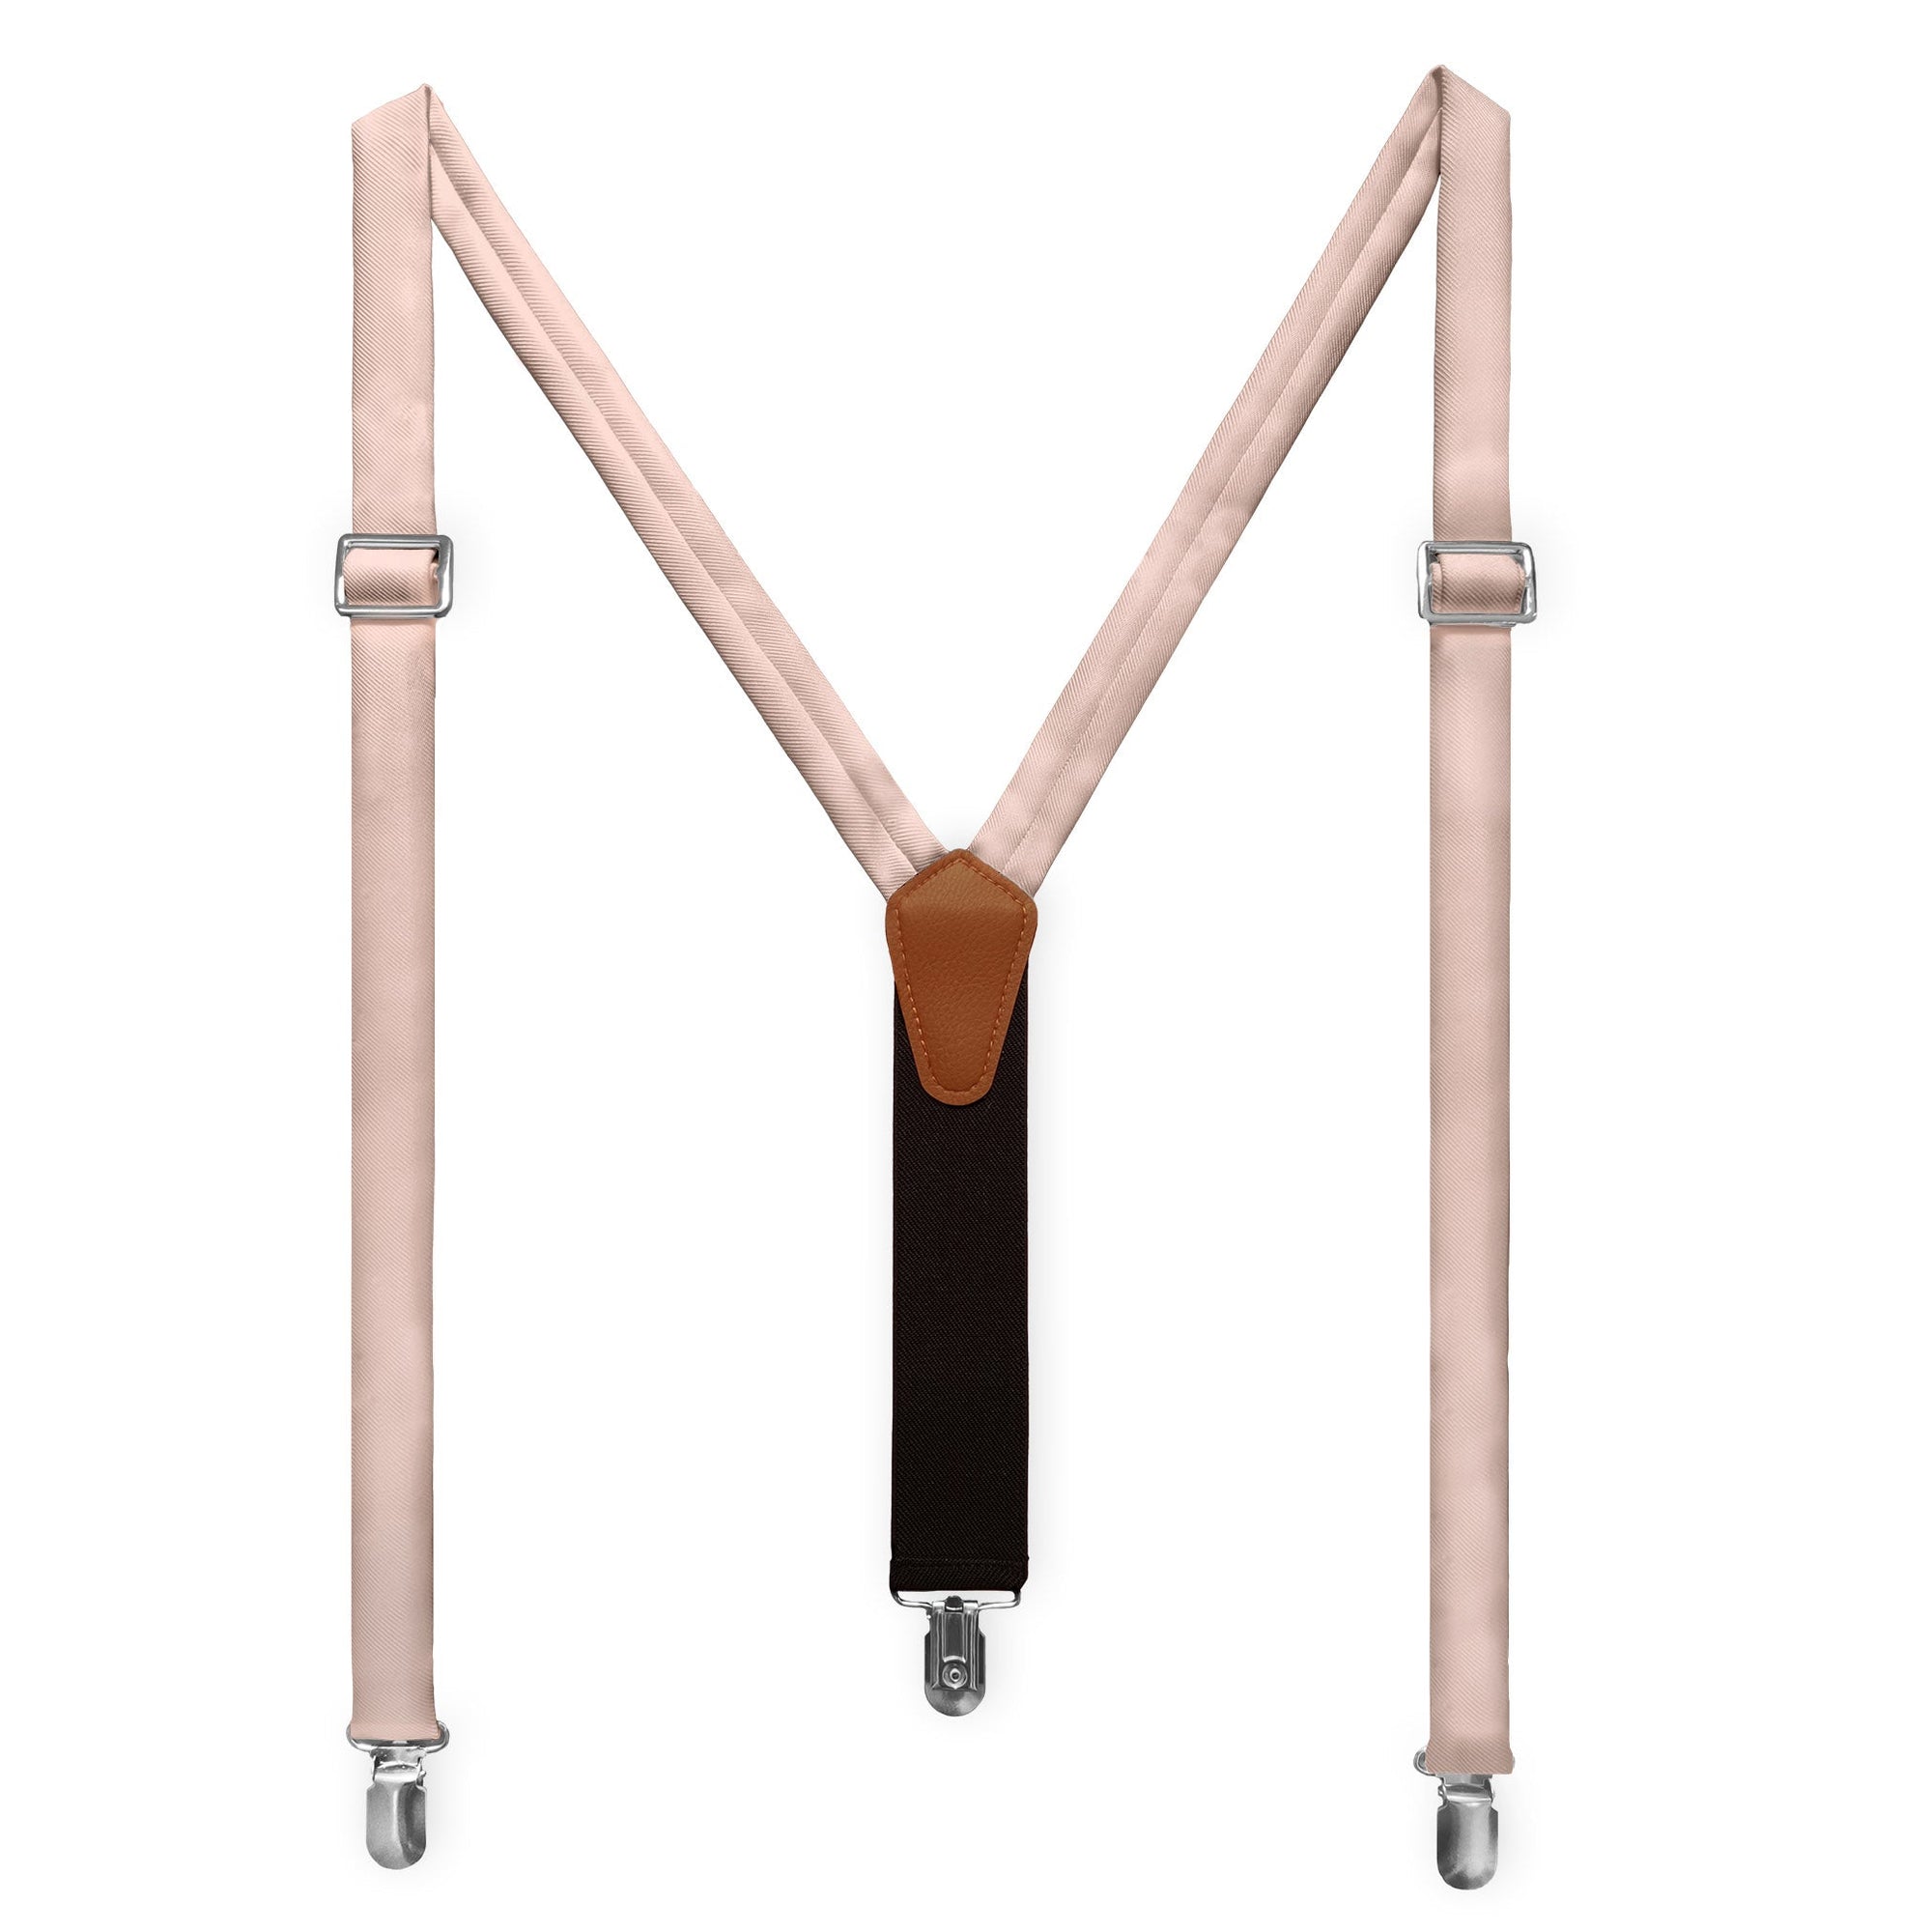 Azazie Pearl Pink Suspenders - Adult Short 36-40" -  - Knotty Tie Co.